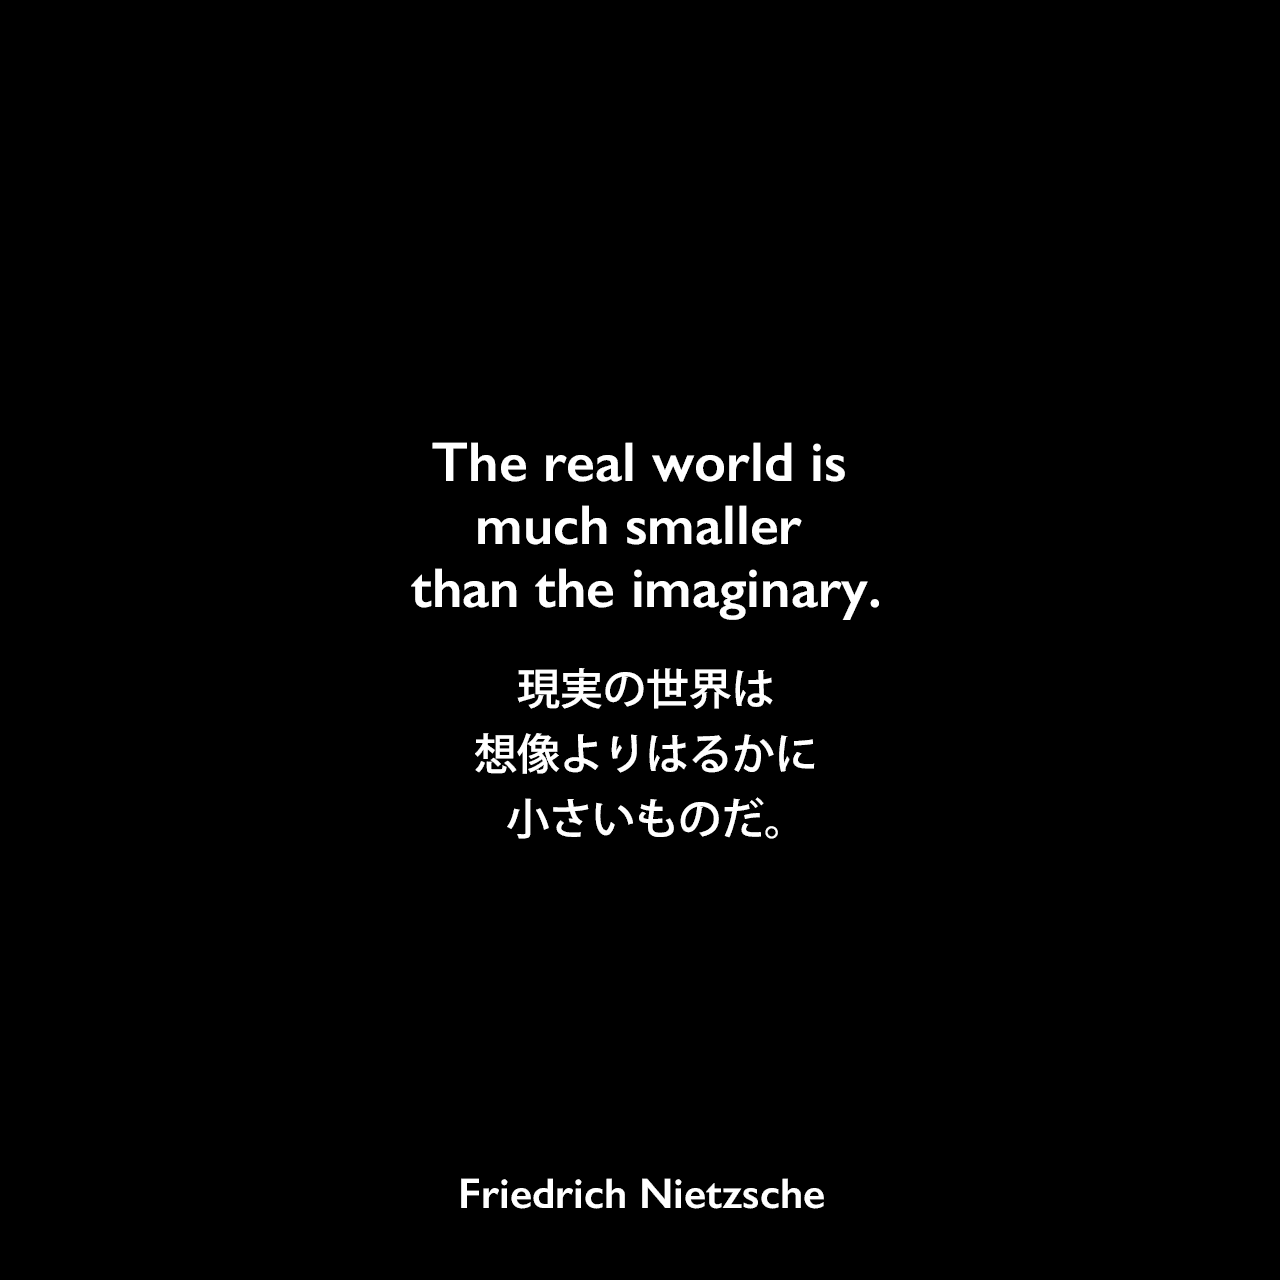 The real world is much smaller than the imaginary.現実の世界は、想像よりはるかに小さいものだ。